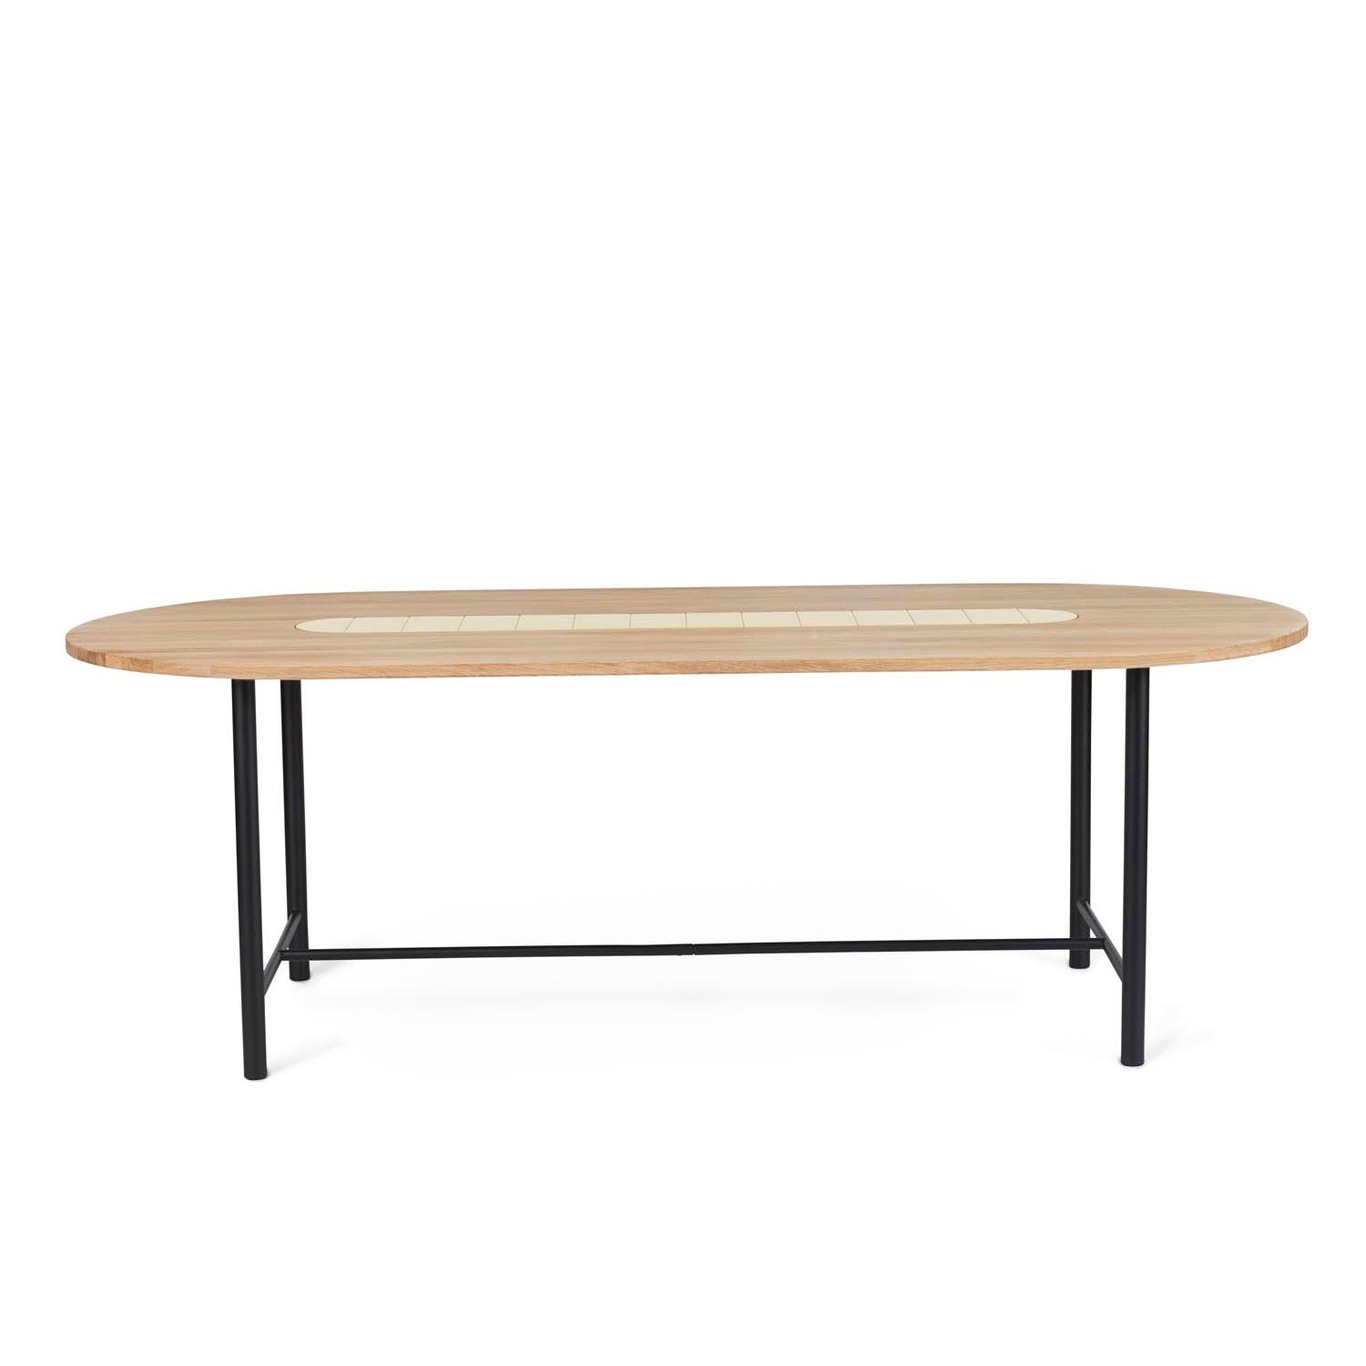 Be My Guest Dining Table 220 cm, White Oiled Oak